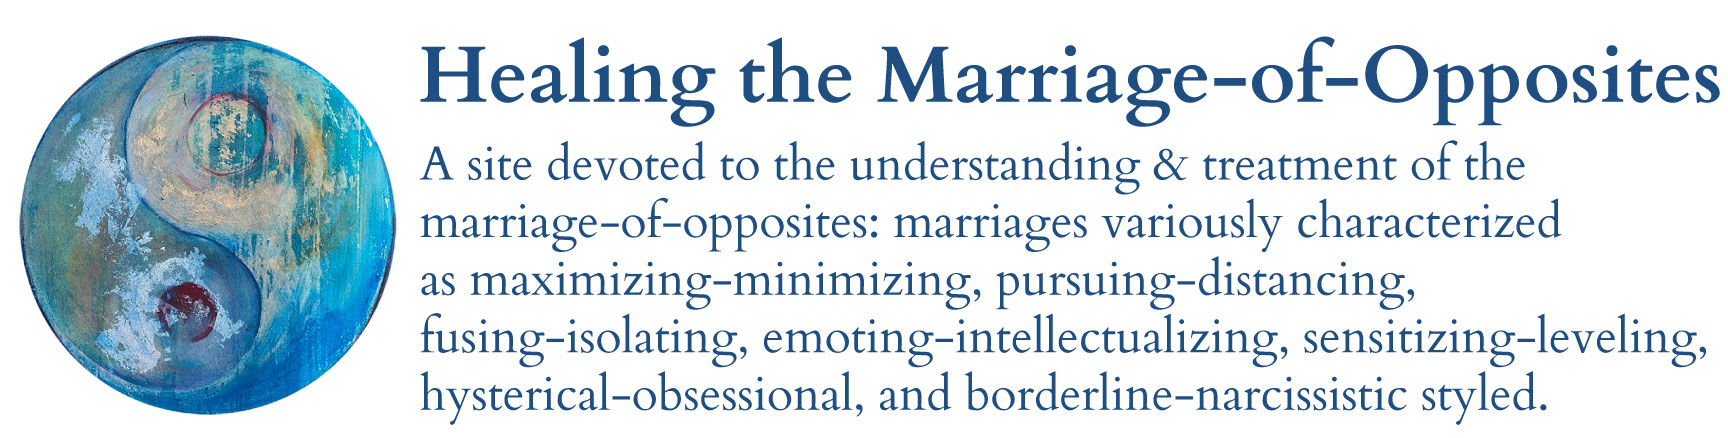 Healing the Marriage-of-Opposites